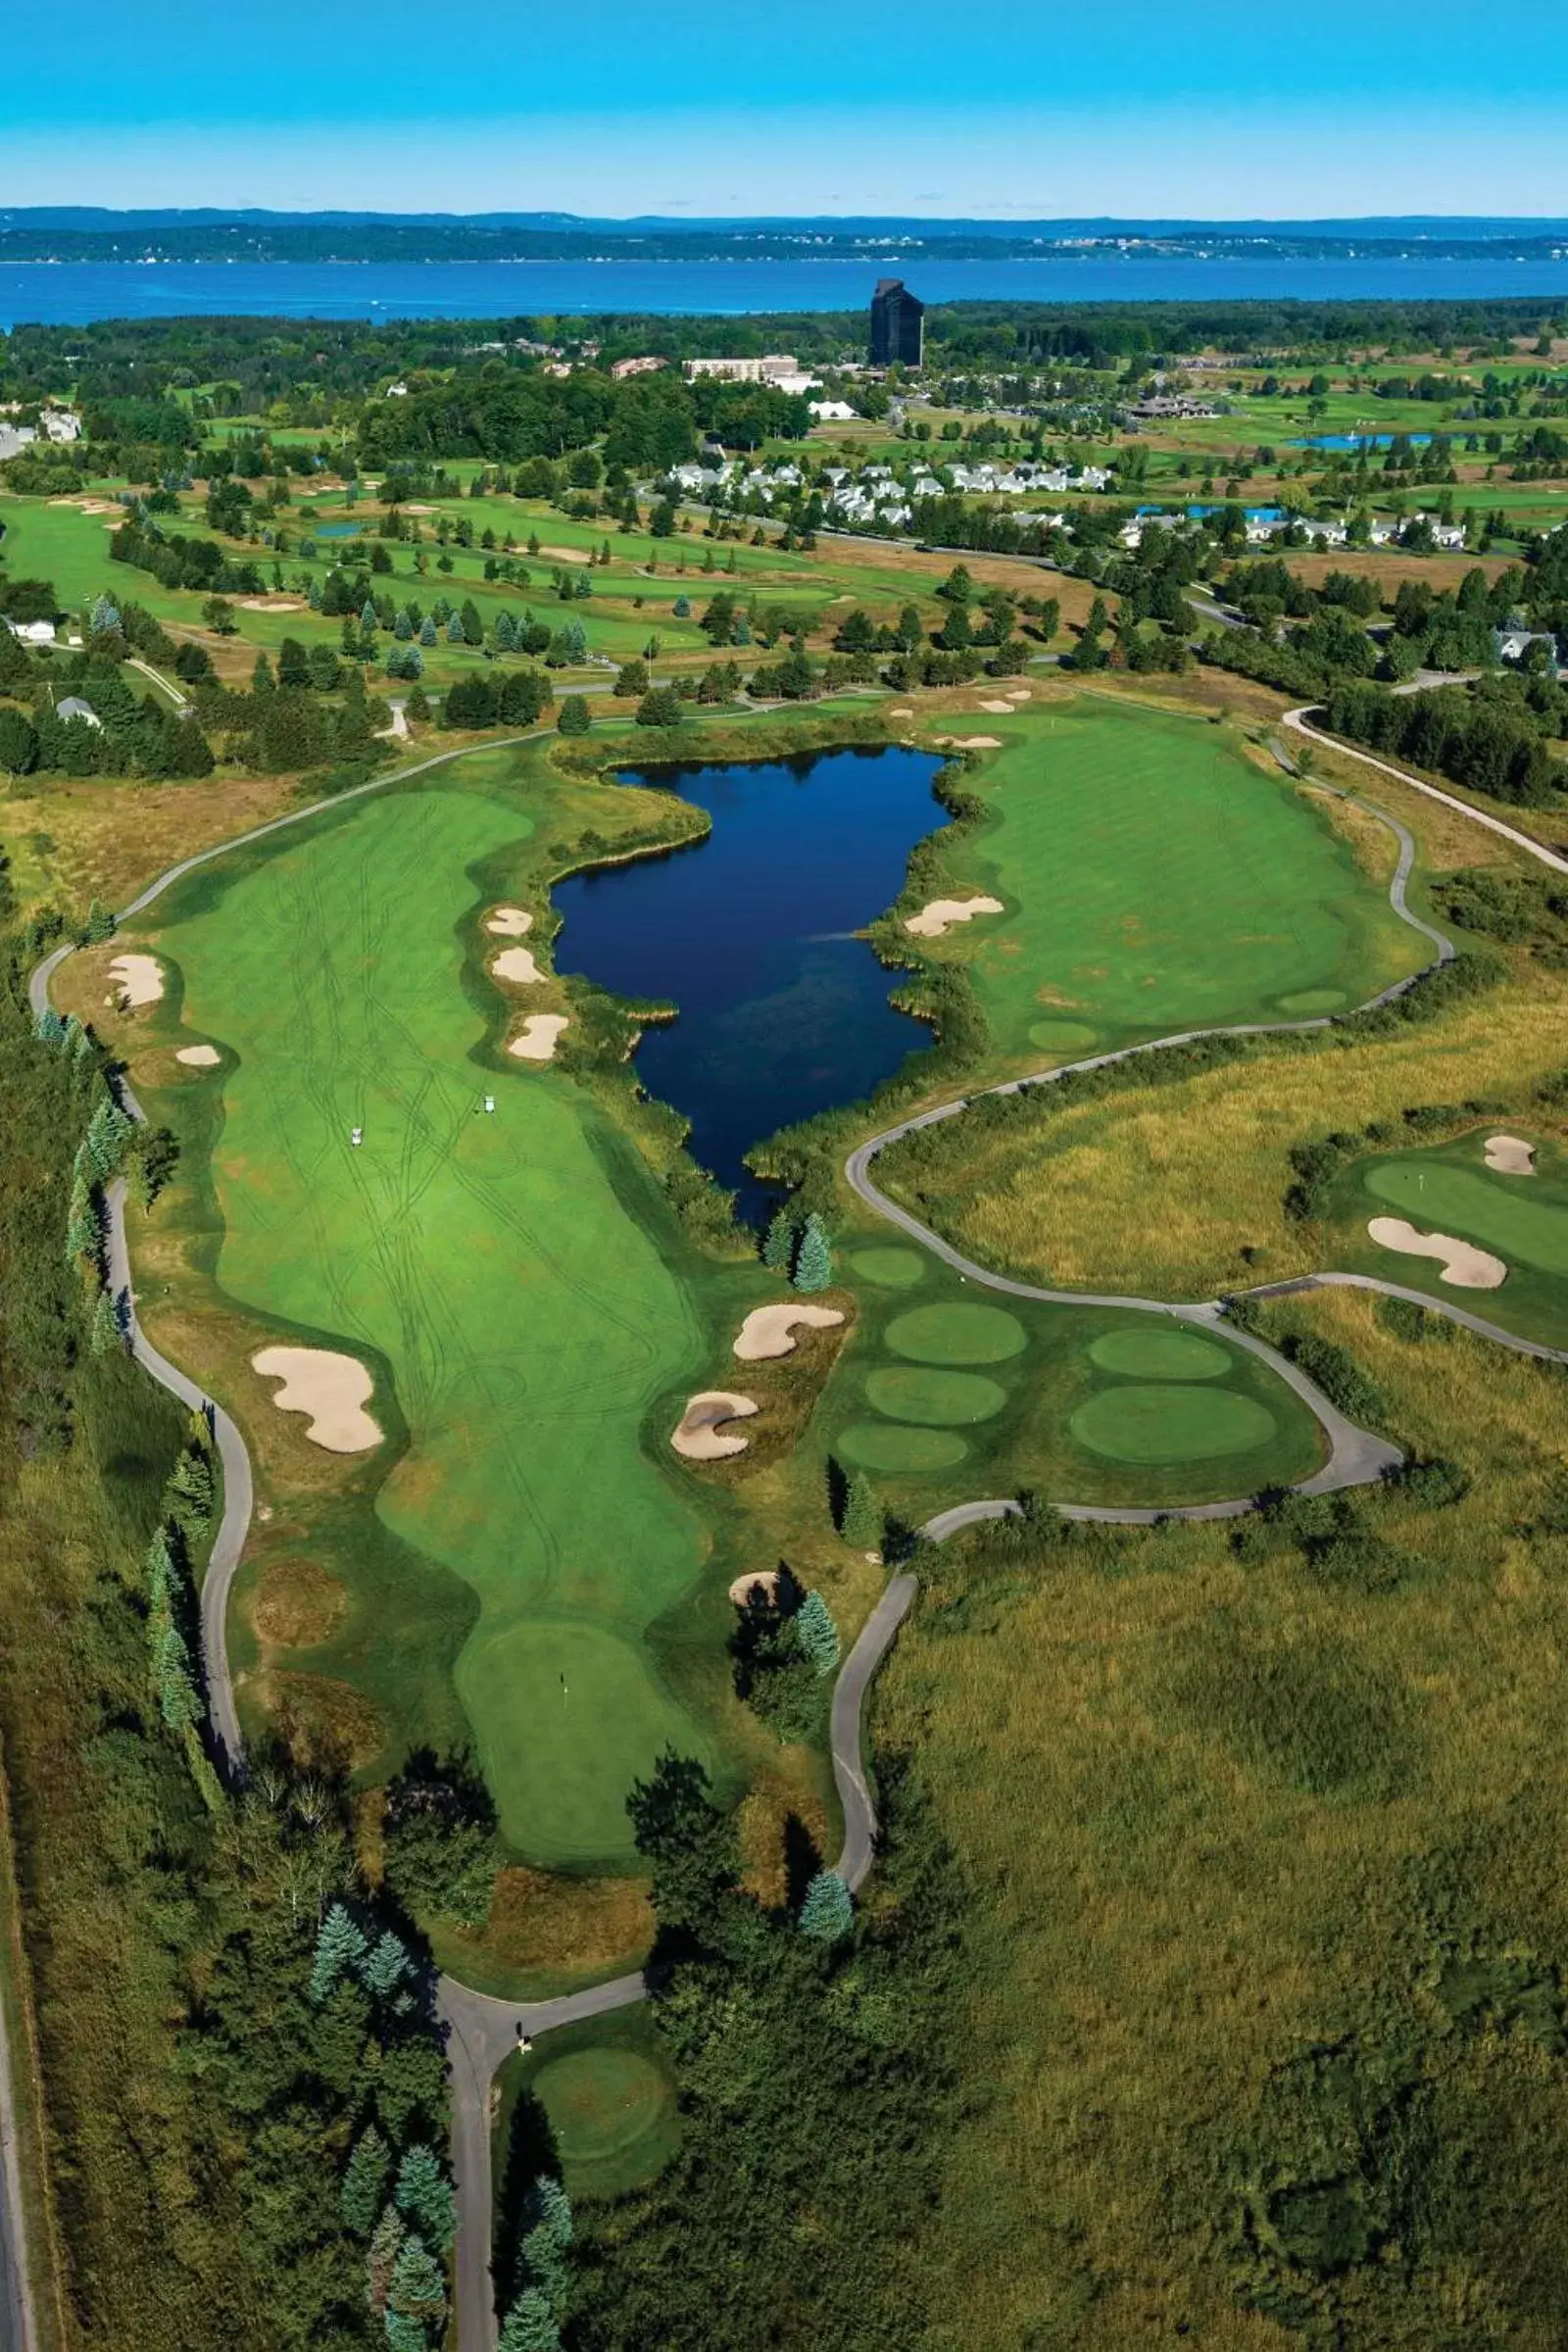 Day, Bird's-eye View in Grand Traverse Resort and Spa